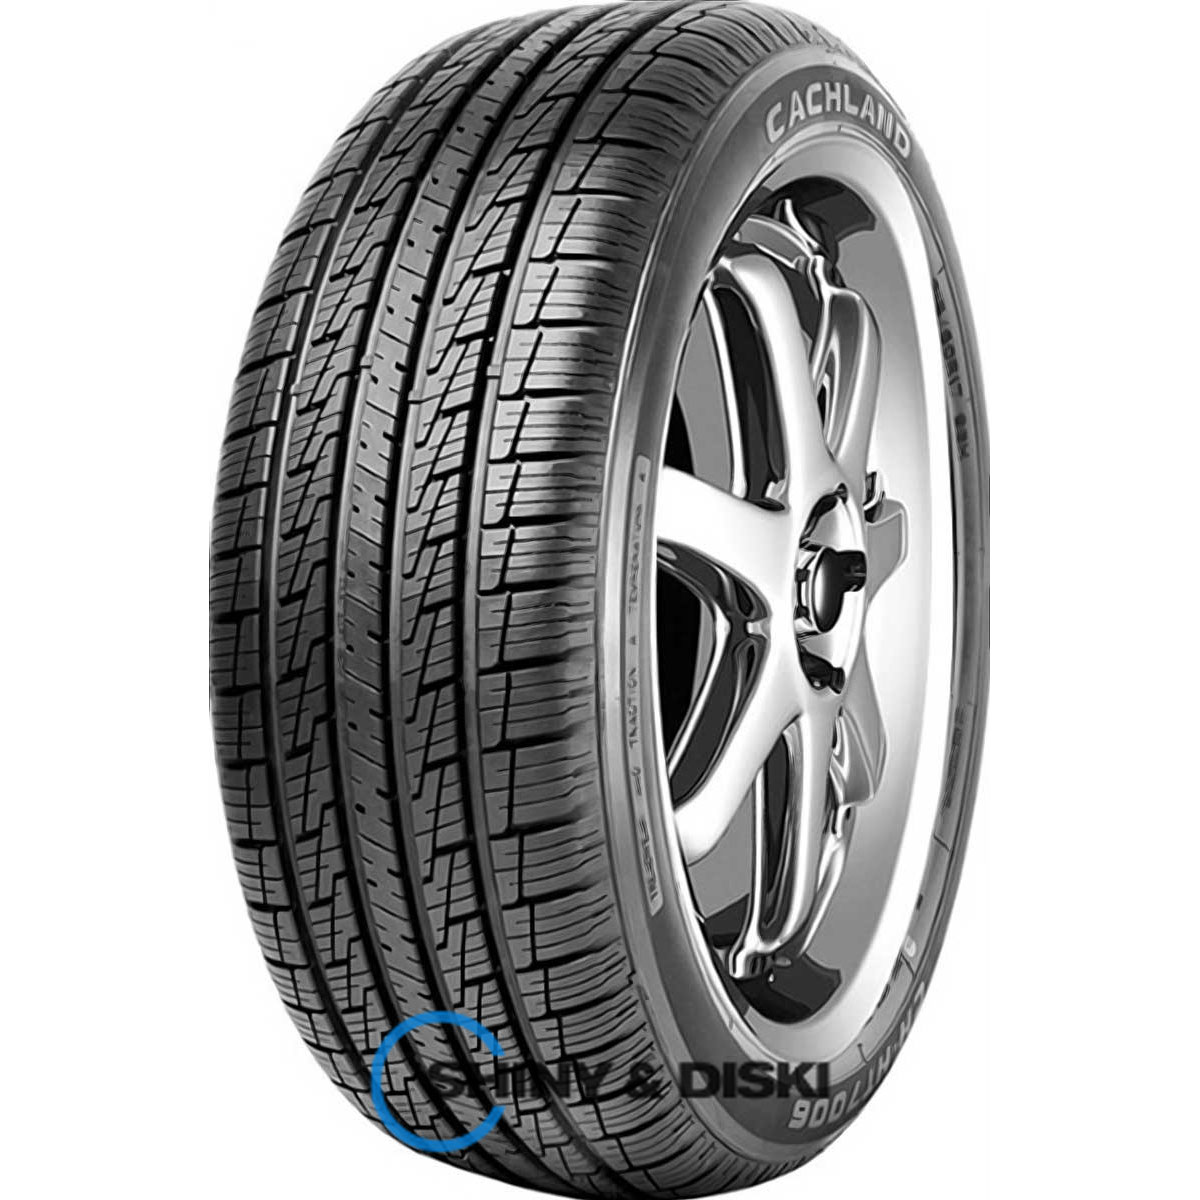 cachland ch-ht7006 225/65 r17 102h